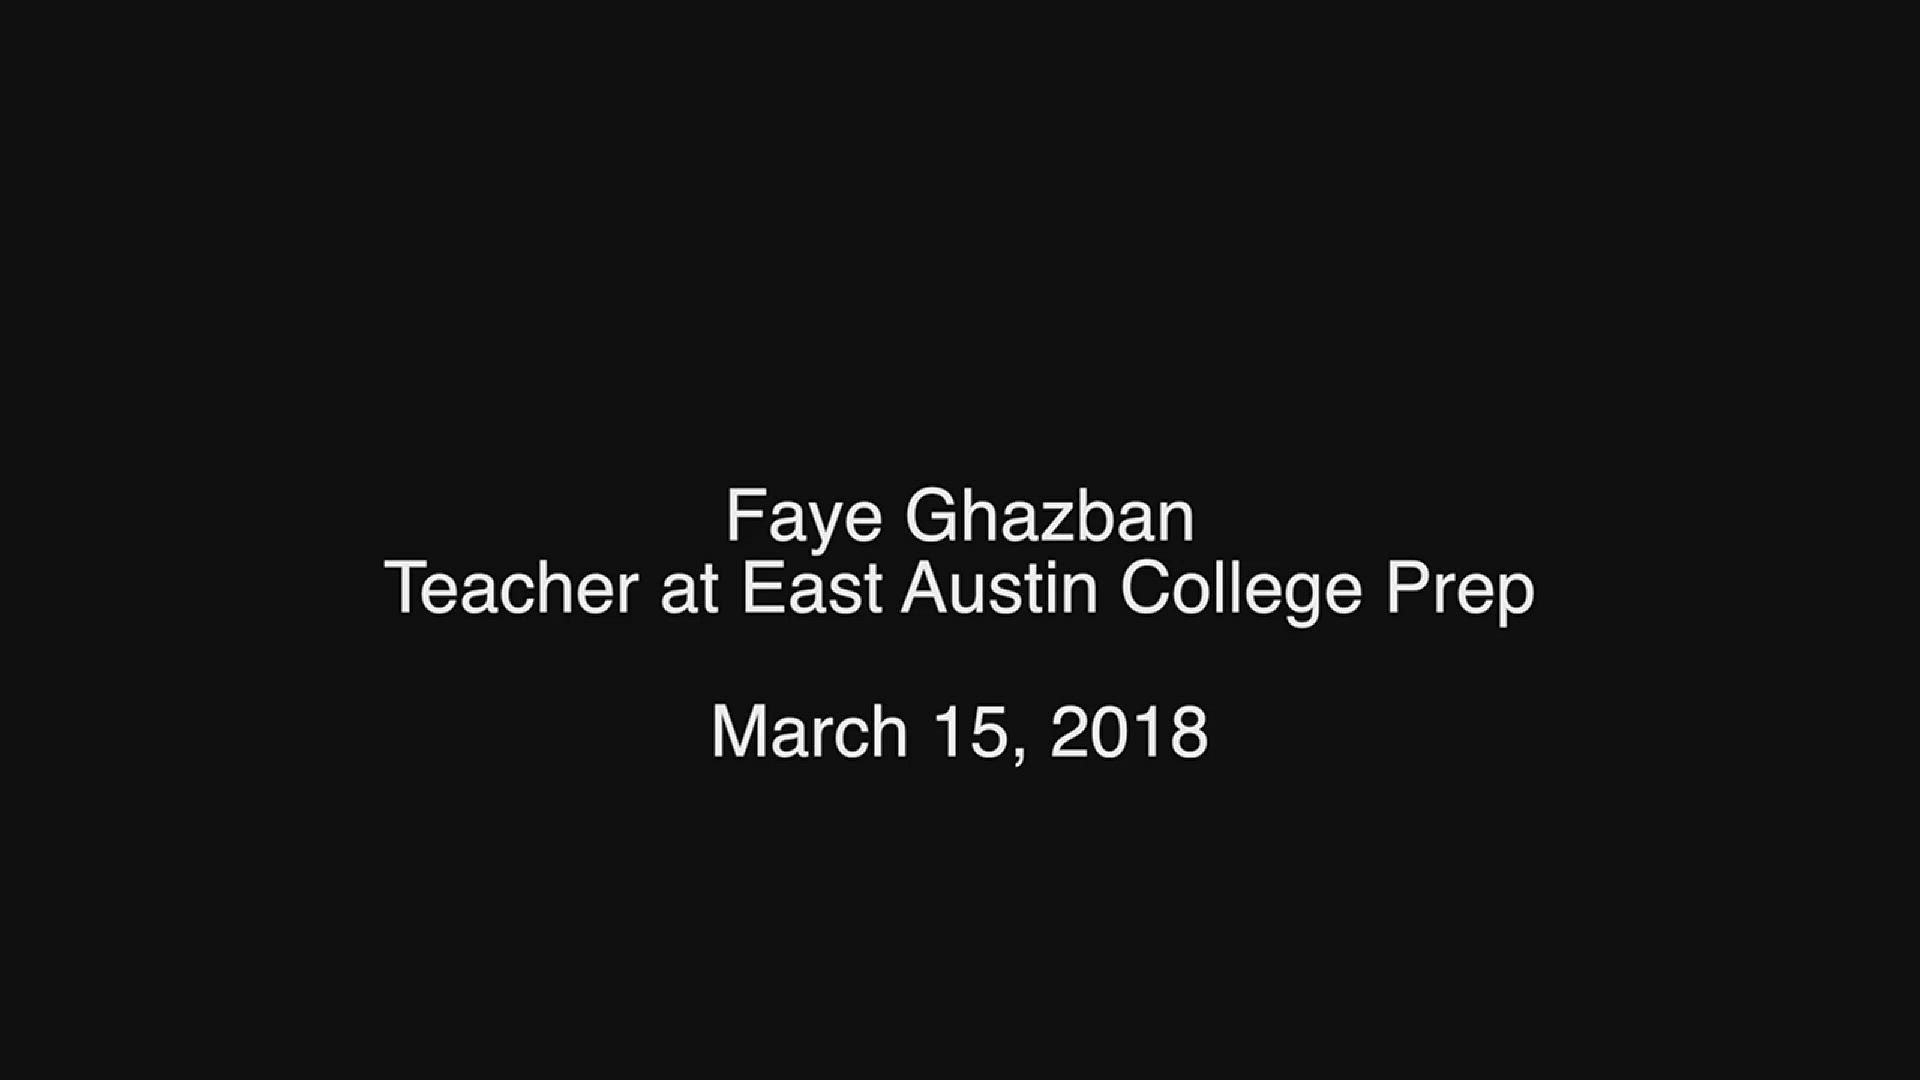 Faye Ghazban talks about her thoughts and memories with Draylen Mason.